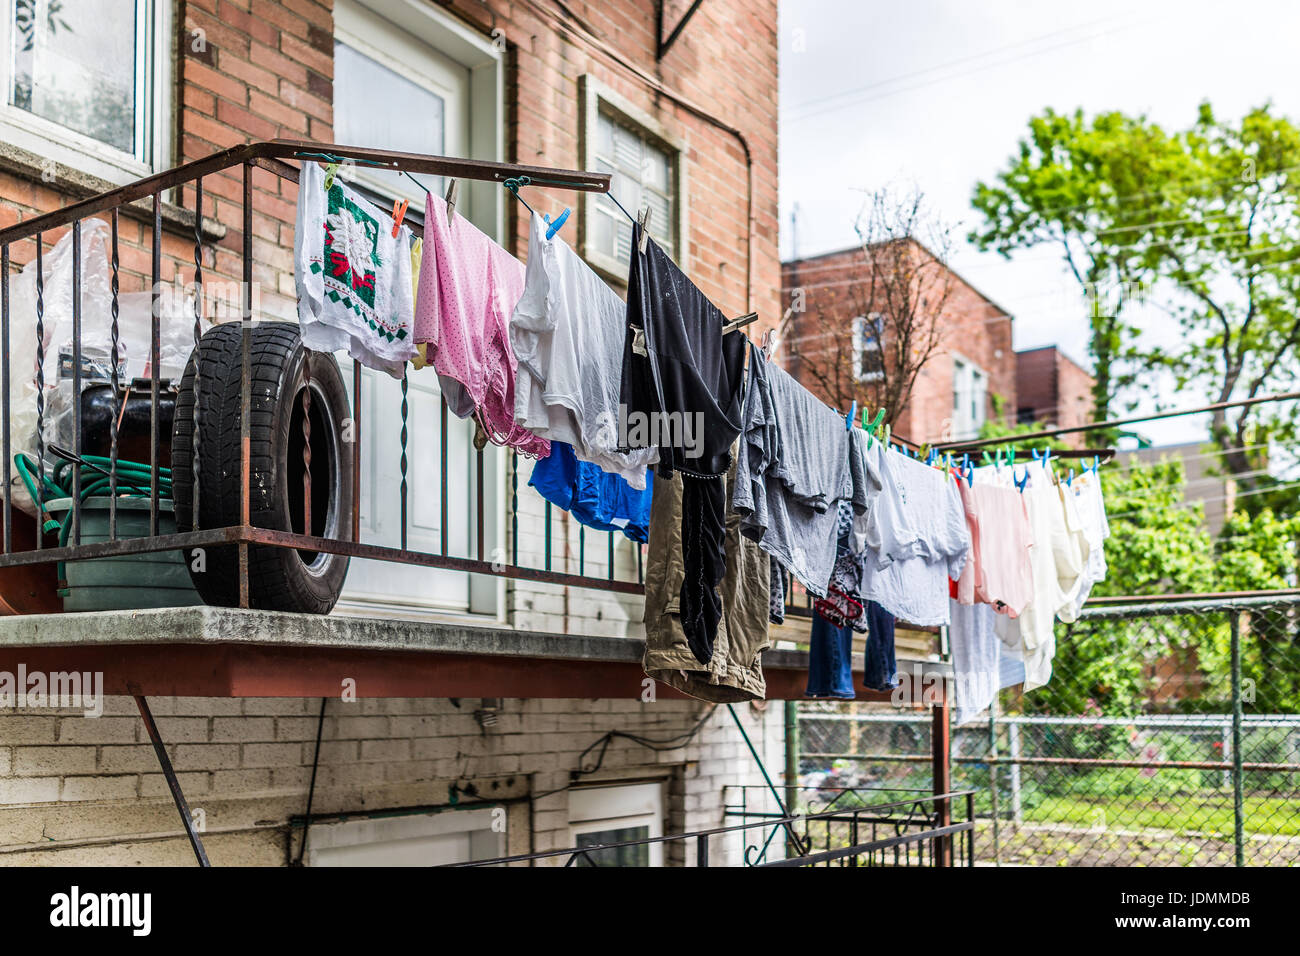 Montreal, Canada - May 27, 2017: Clothes laundry hanging on a